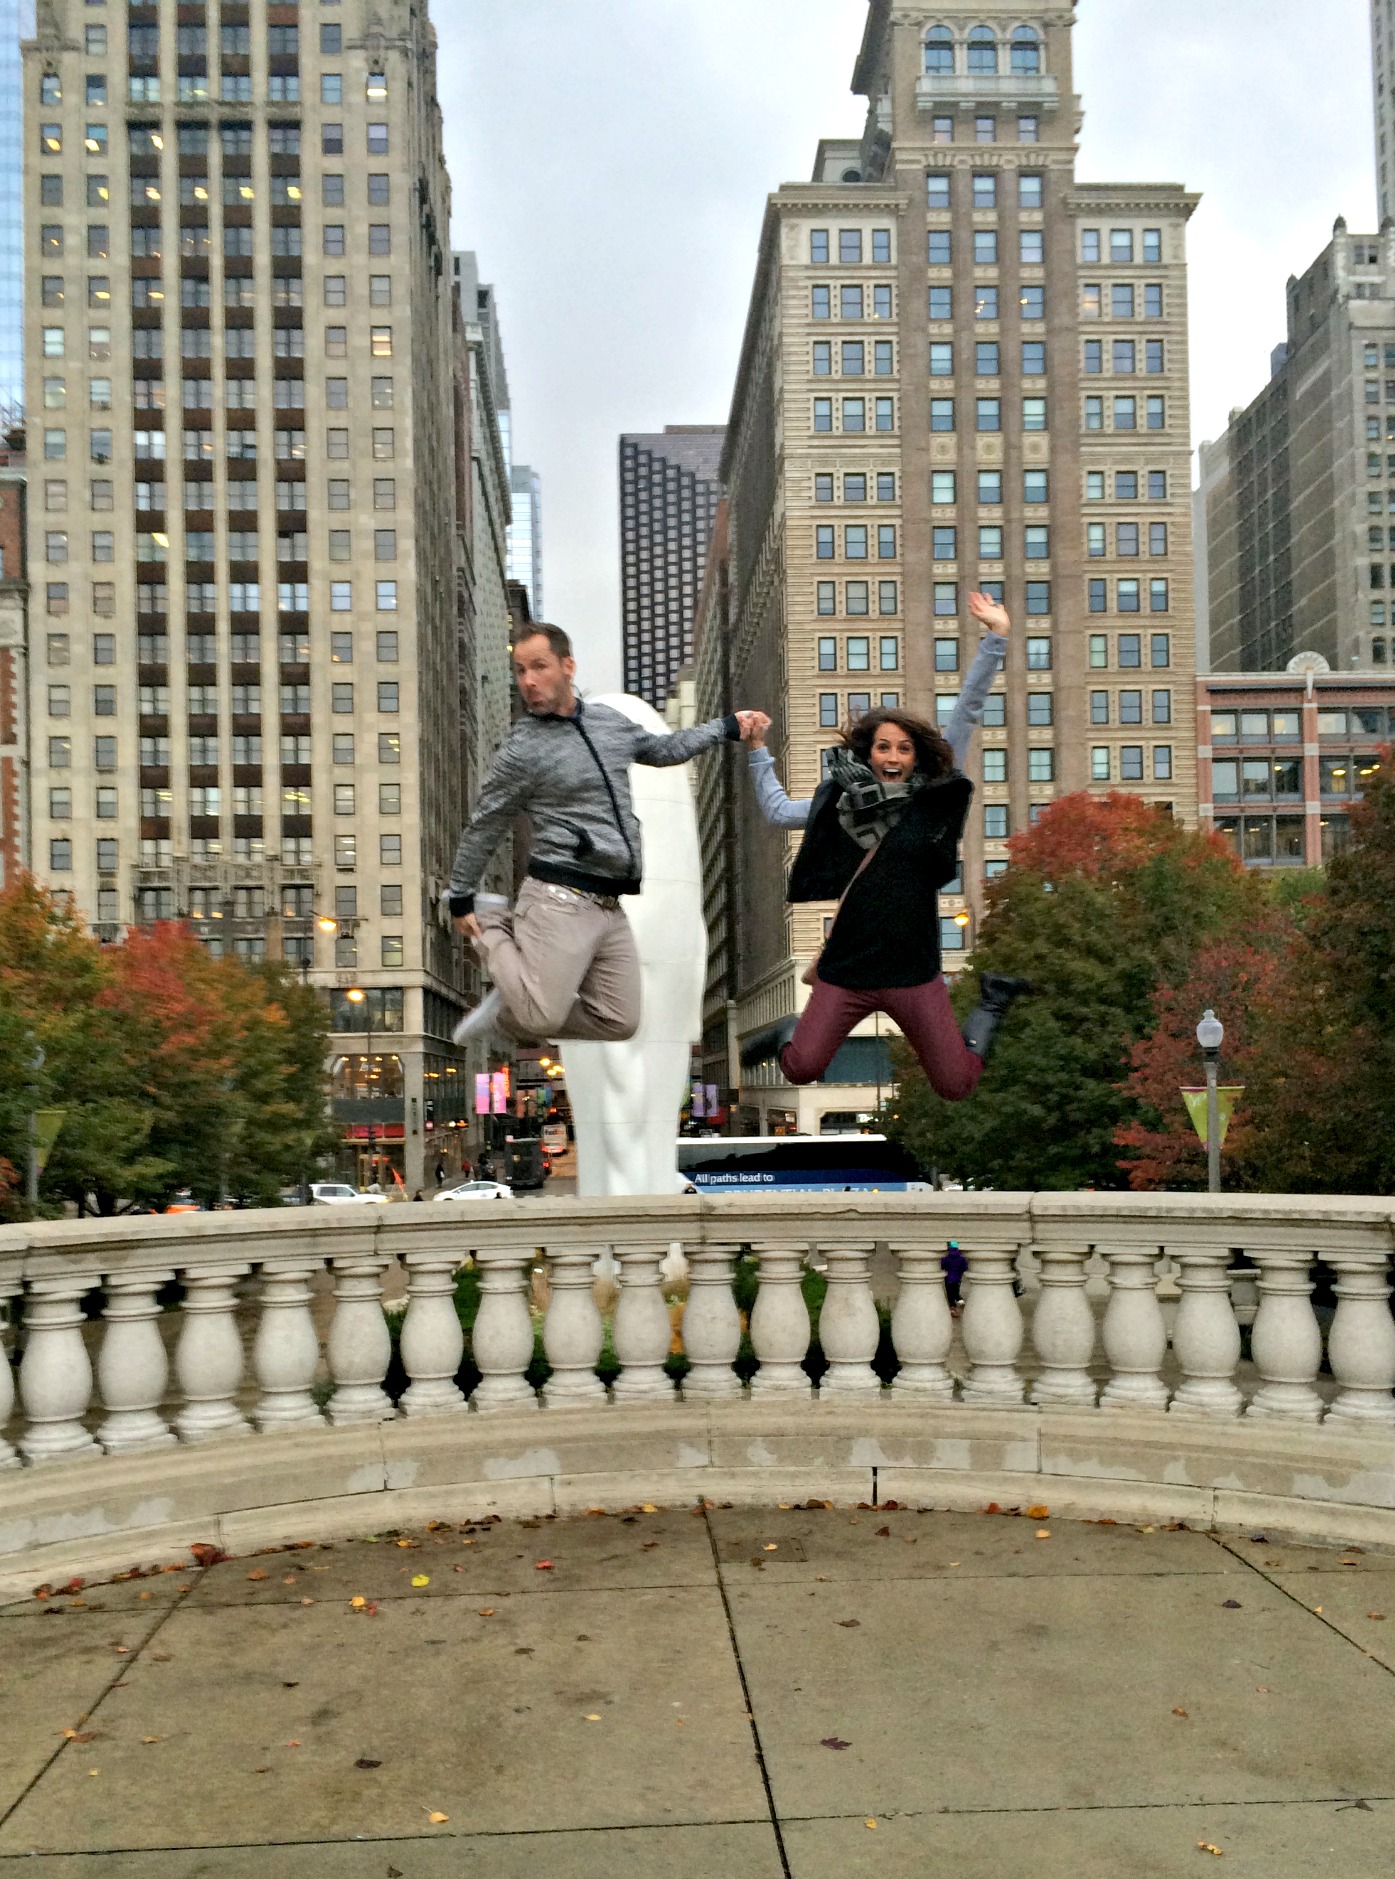 Scott and I jumping in Millineum Park Chicago